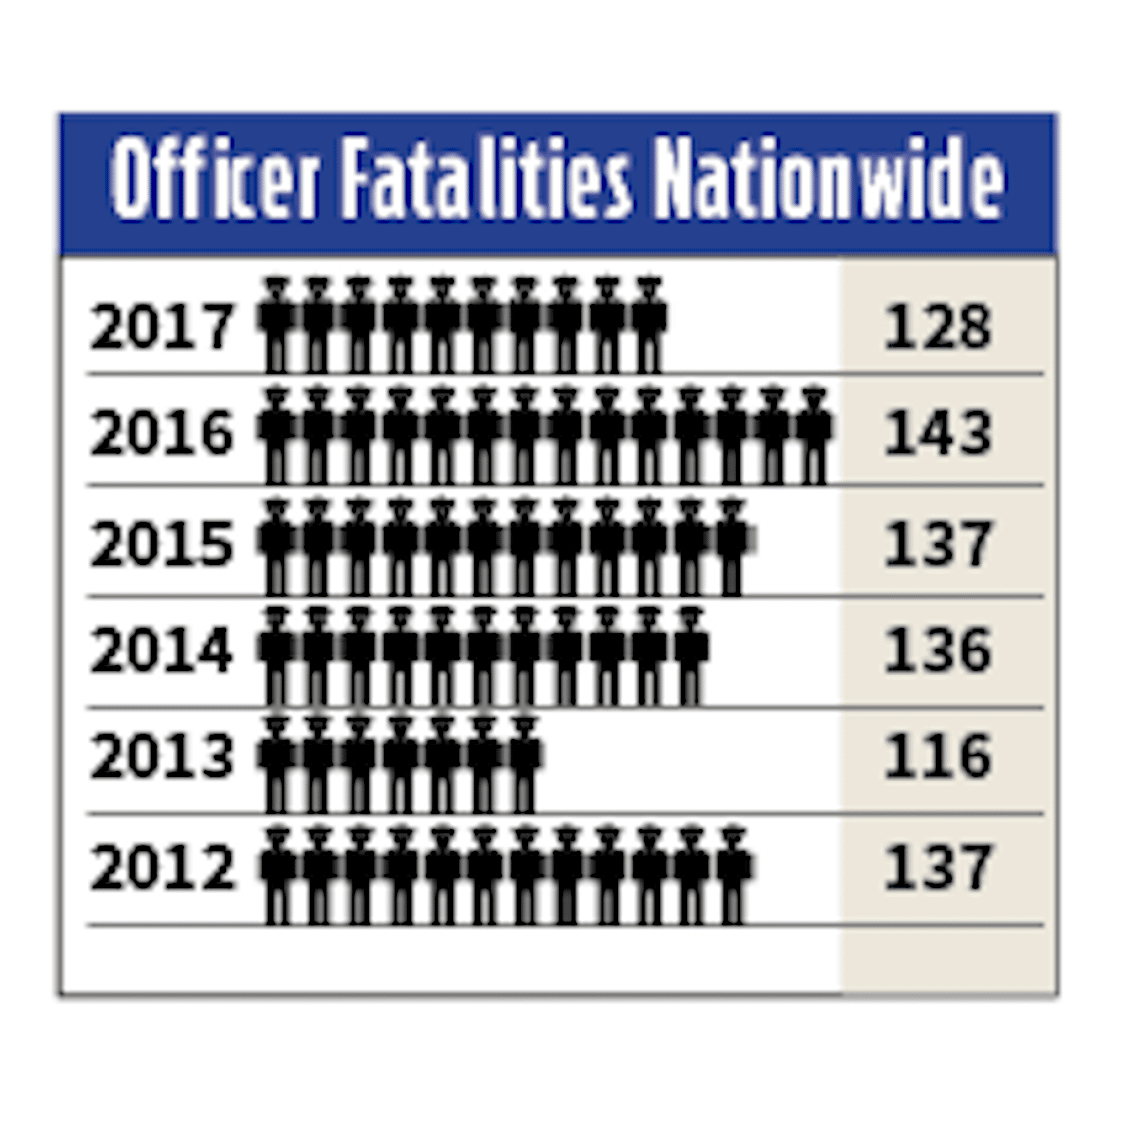 128 Law Enforcement Officer Fatalities Nationwide in 2017